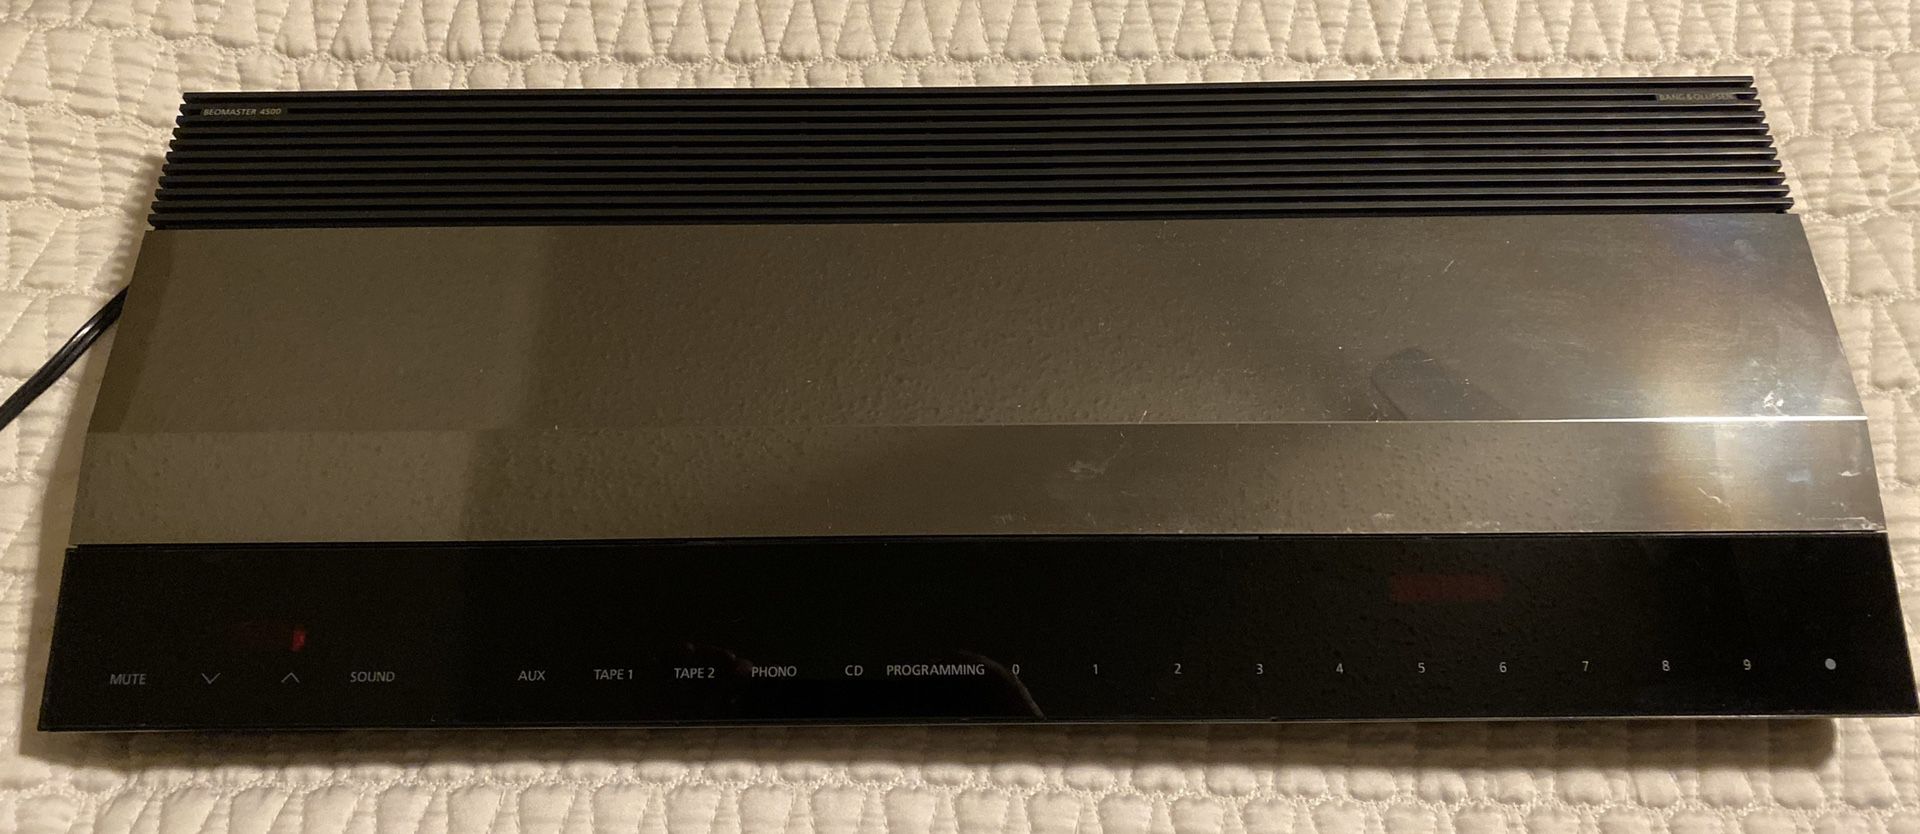 Bang & Olufsen 4500 System (Receiver, Phono, CD, Tape) $450